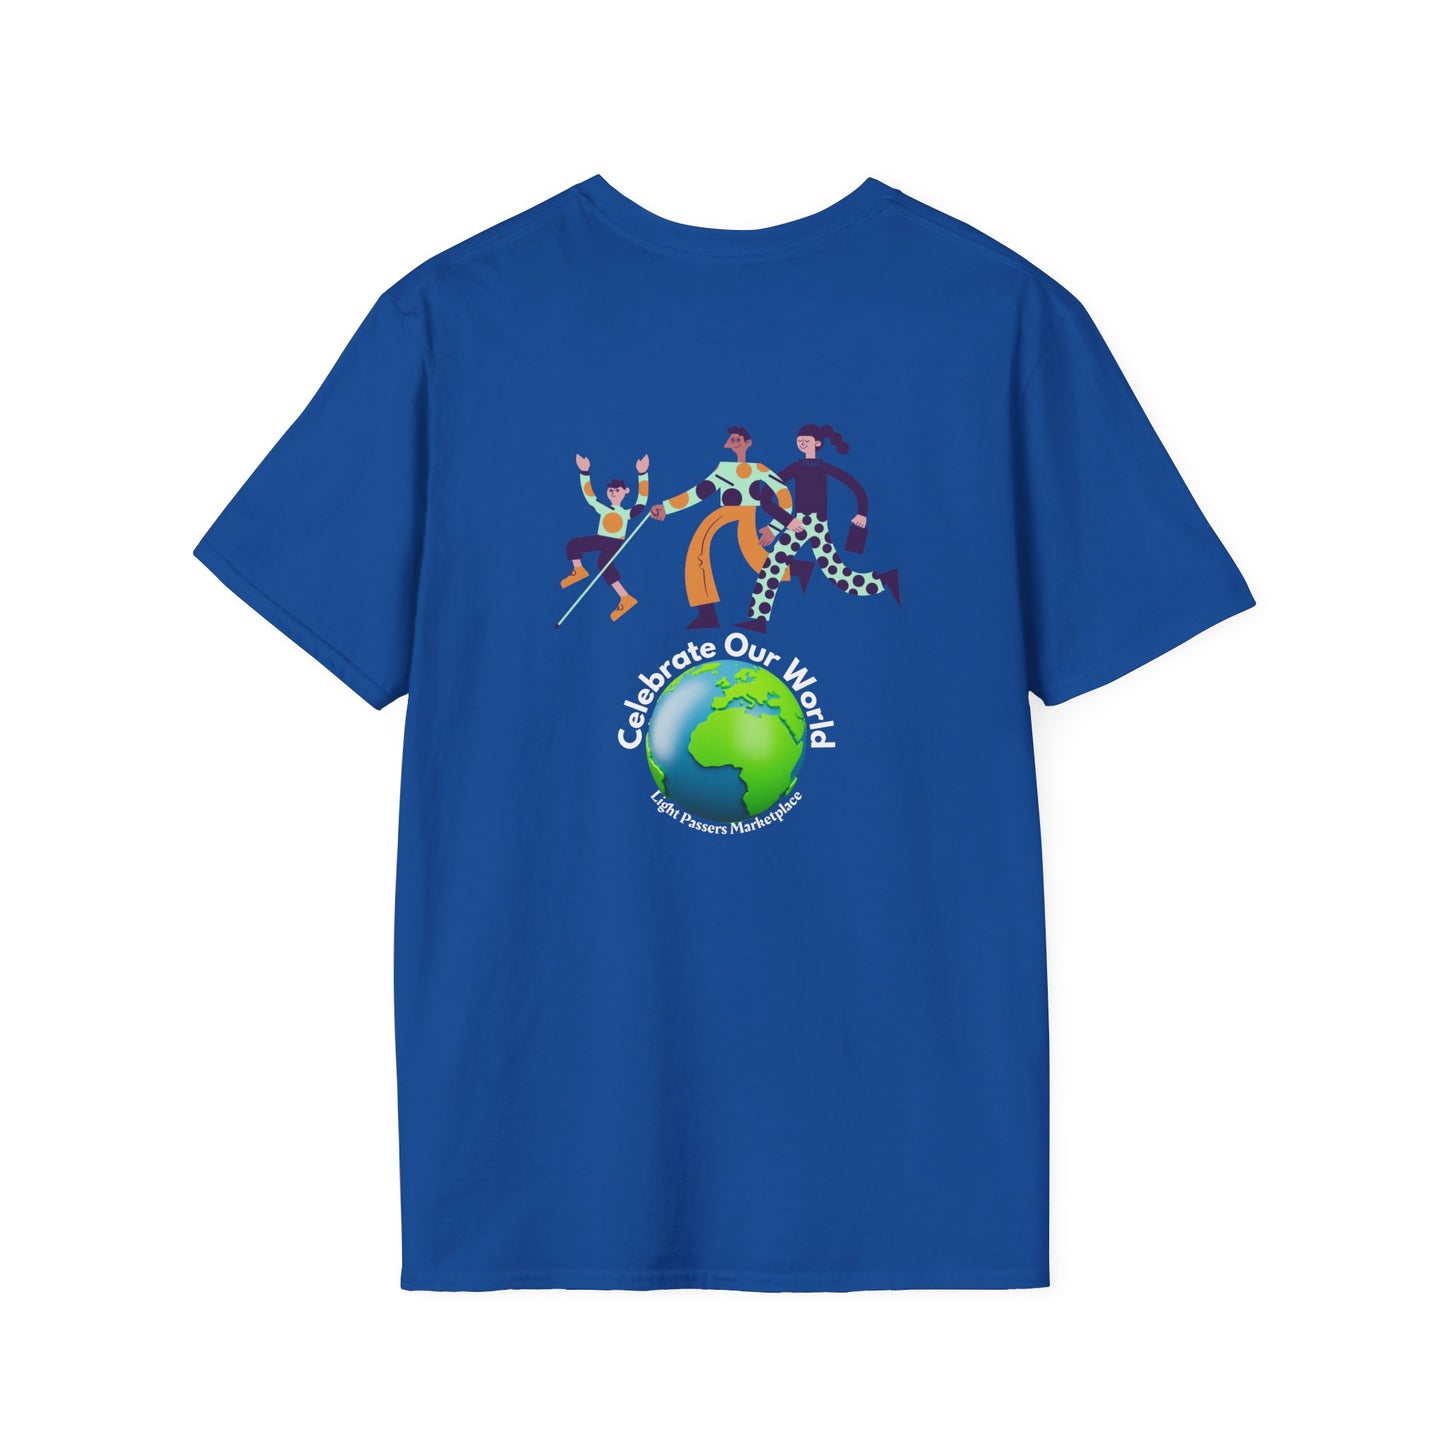 A blue unisex t-shirt featuring a globe and people graphic. Made of soft 100% cotton with twill tape shoulders and no side seams for durability. Classic fit with crew neckline for versatile style.